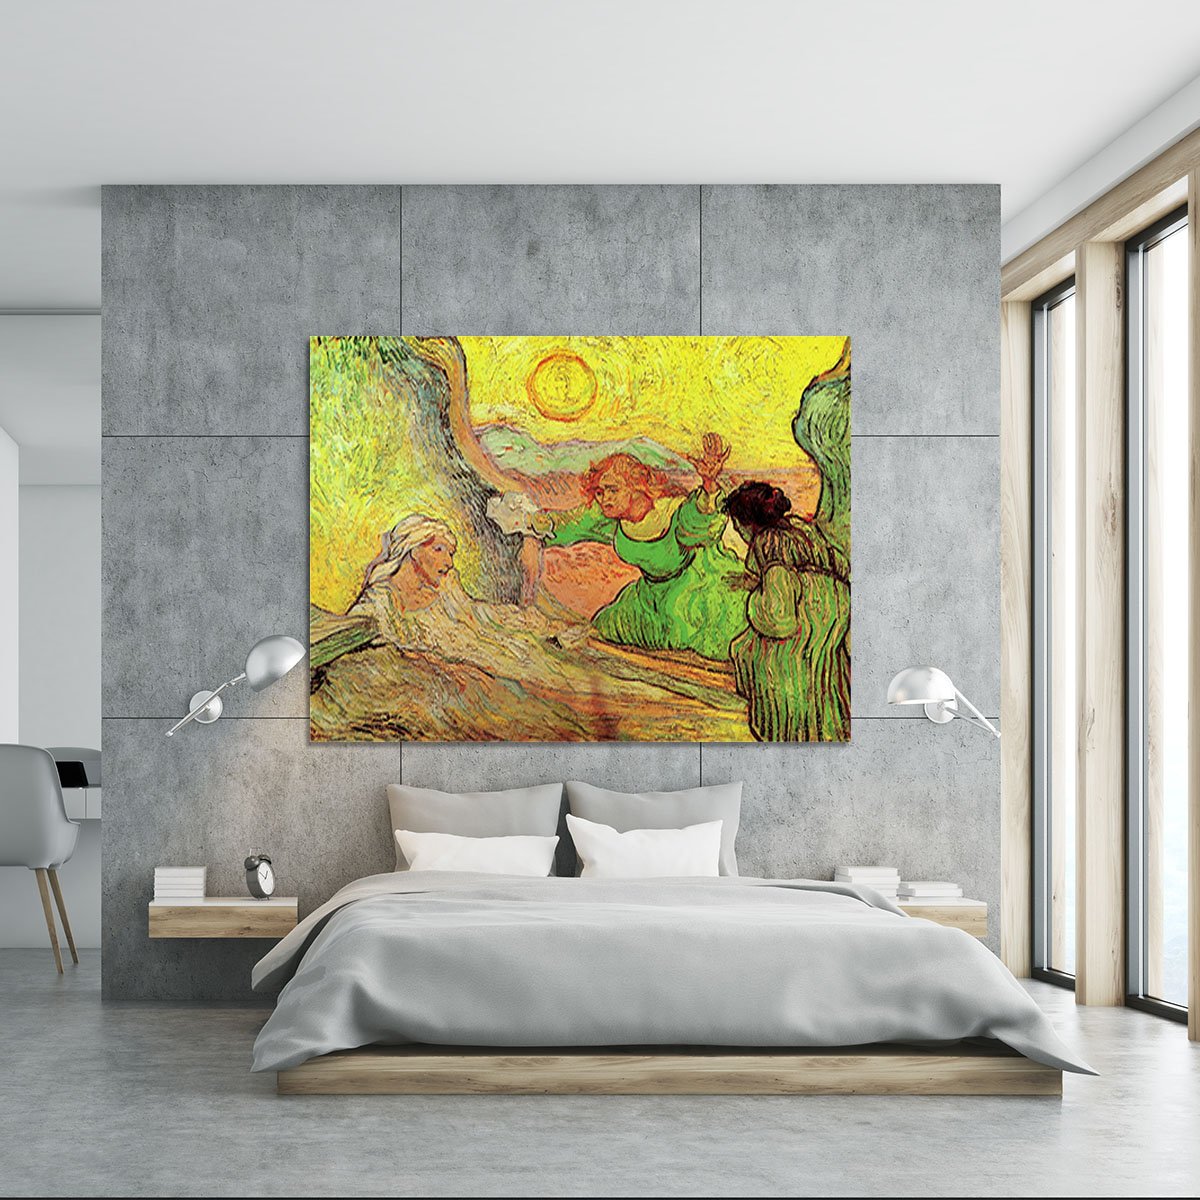 The Raising of Lazarus after Rembrandt by Van Gogh Canvas Print or Poster